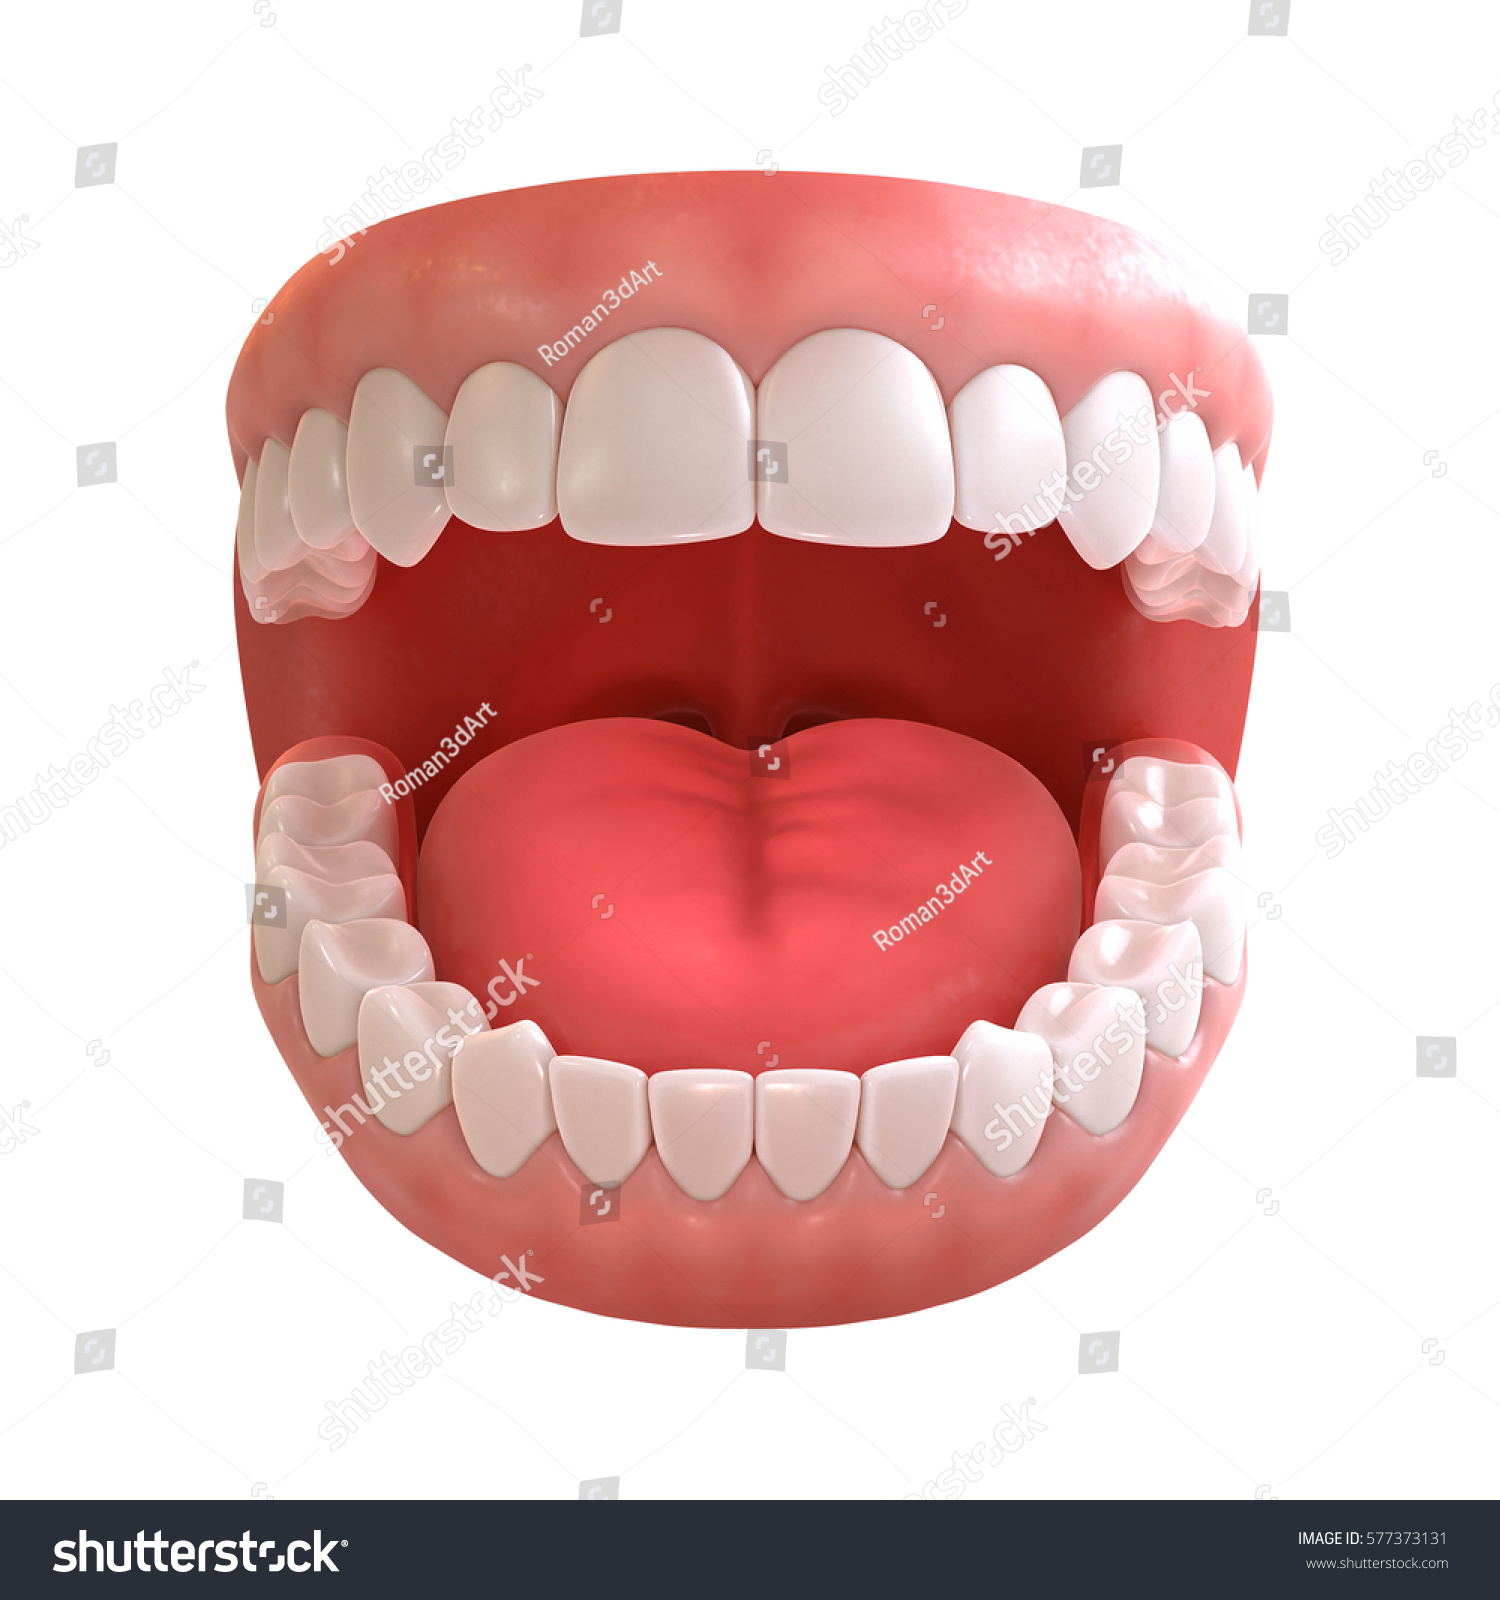 3 D Rendering Human Teeth Open Mouth Stock Illustration 577373131 ...